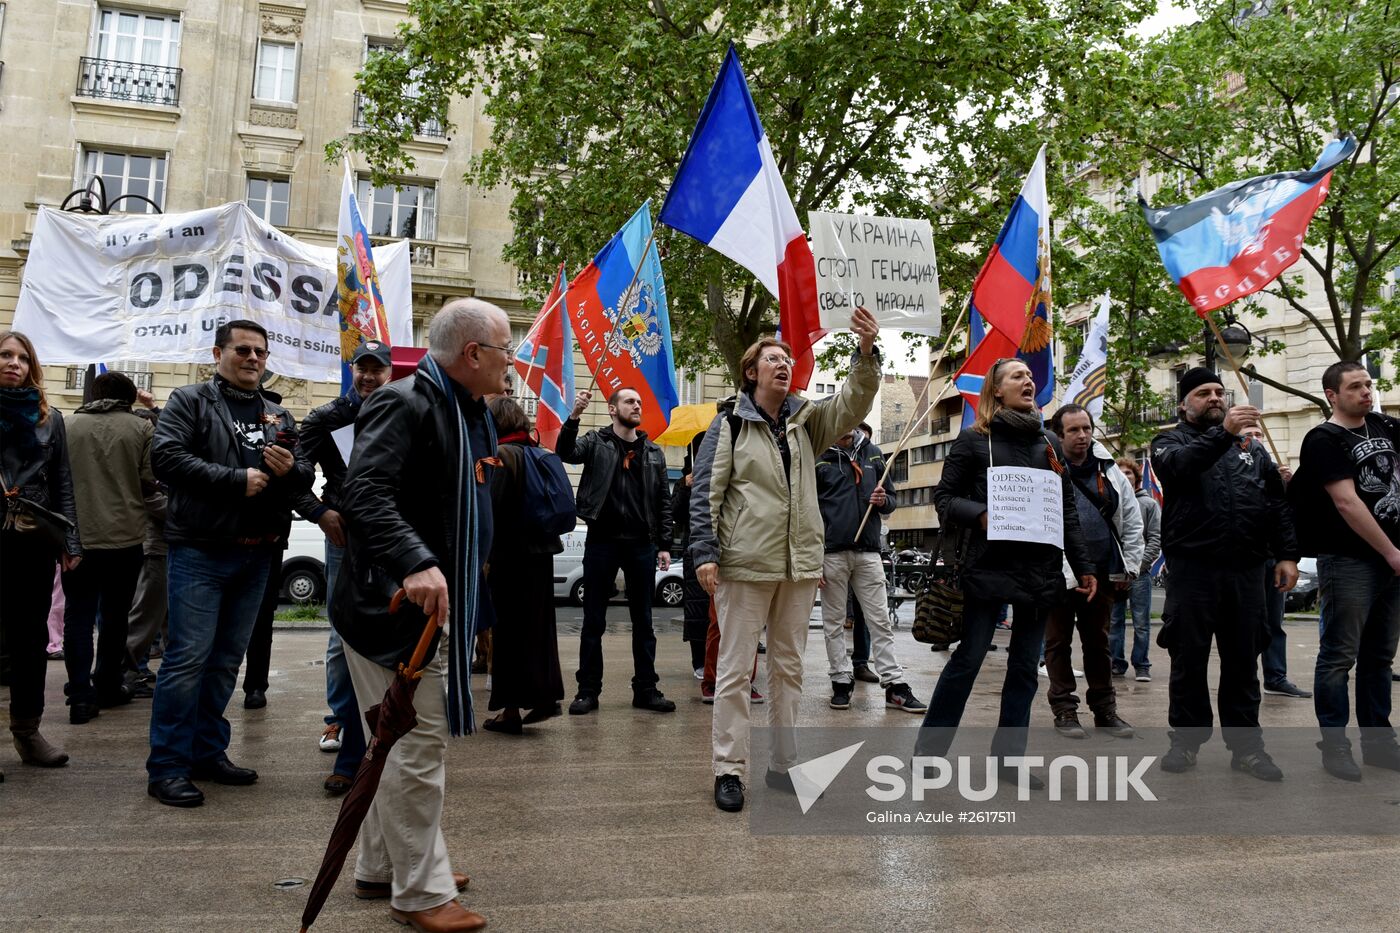 Victims of May 2, 2014 Odessa massacre commerorated in Europe